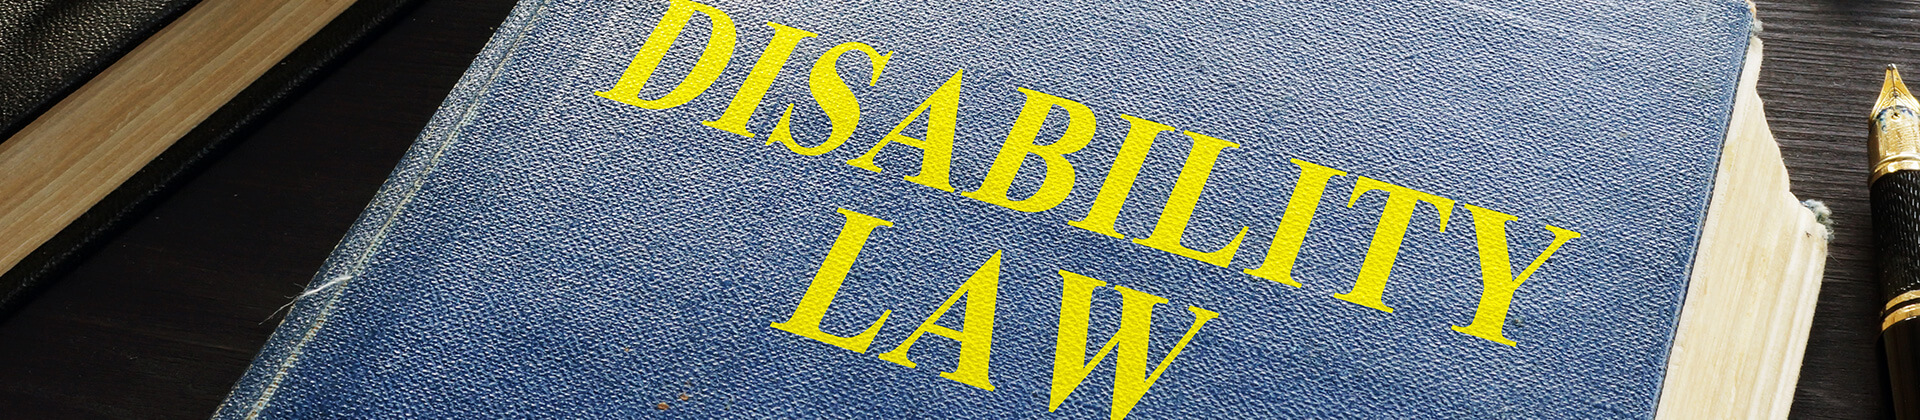 Disability law book